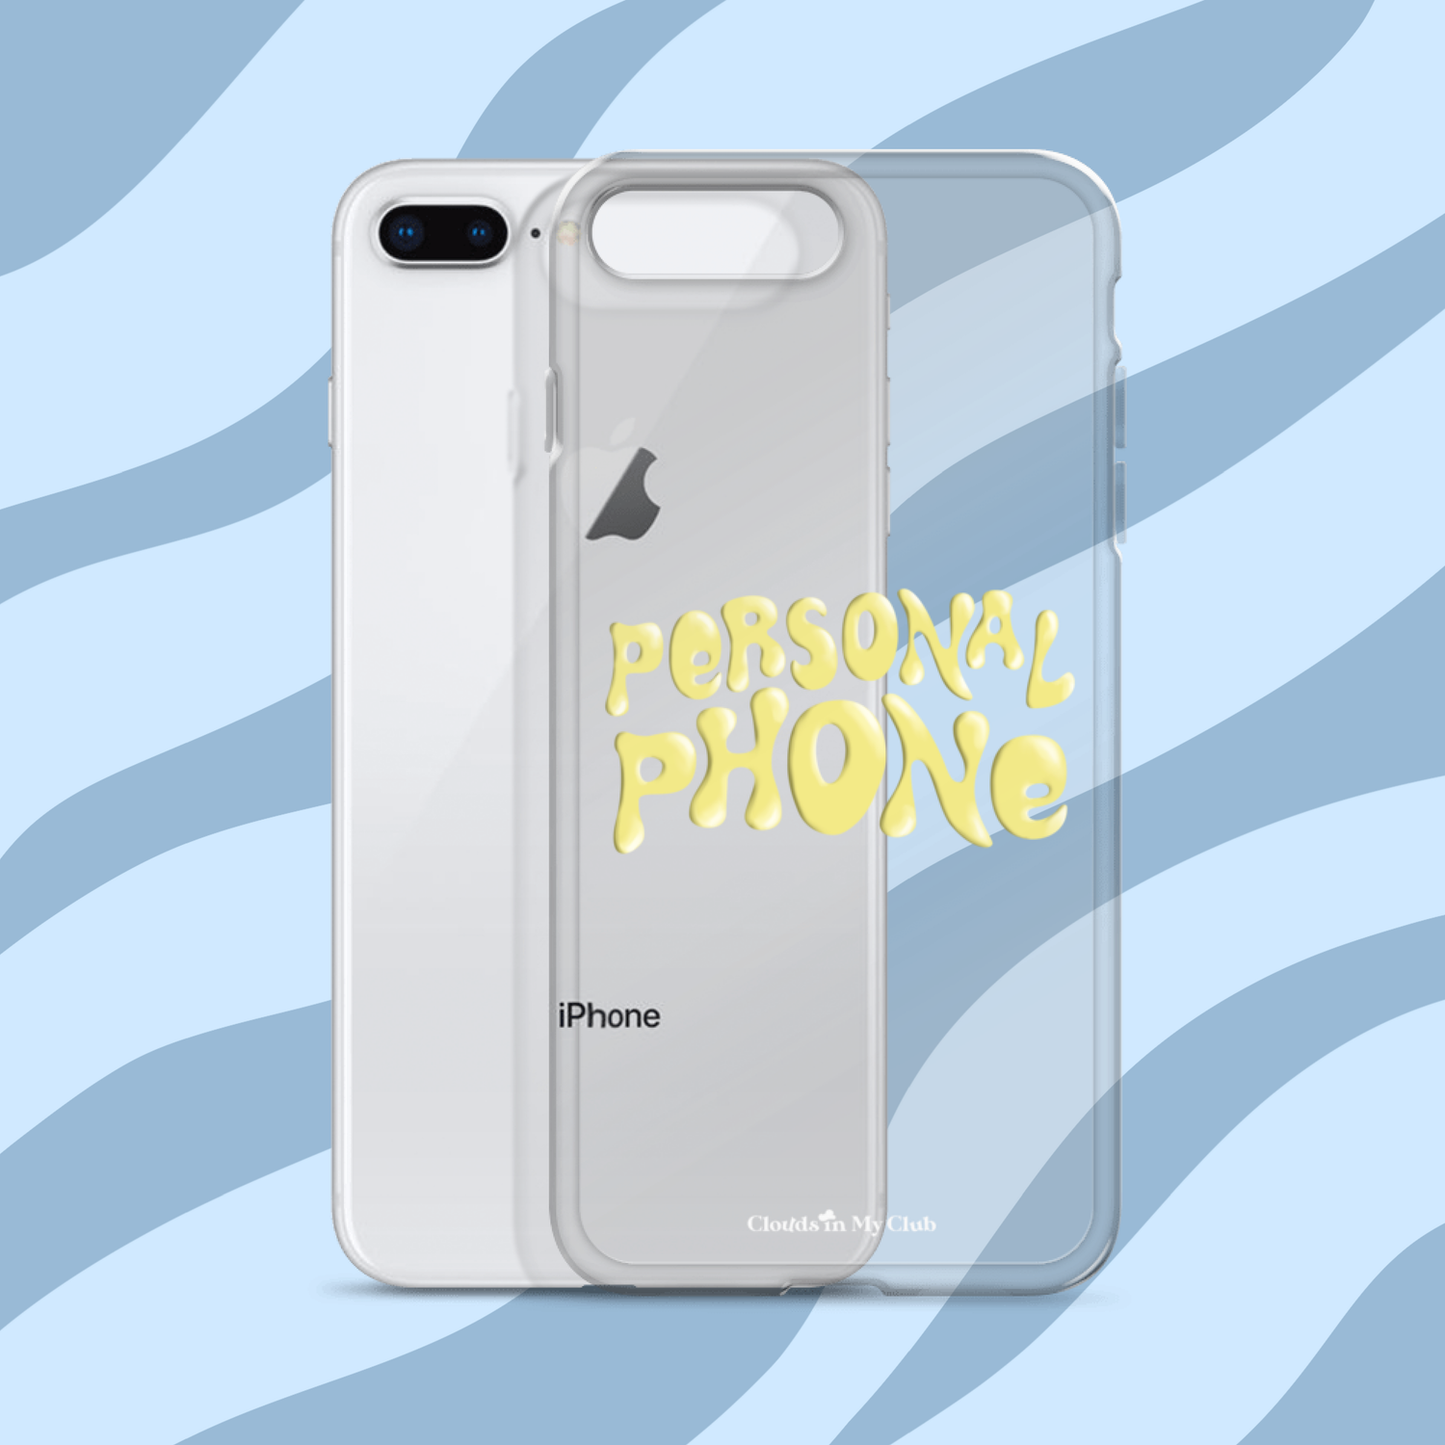 "Personal Phone" iPhone Case